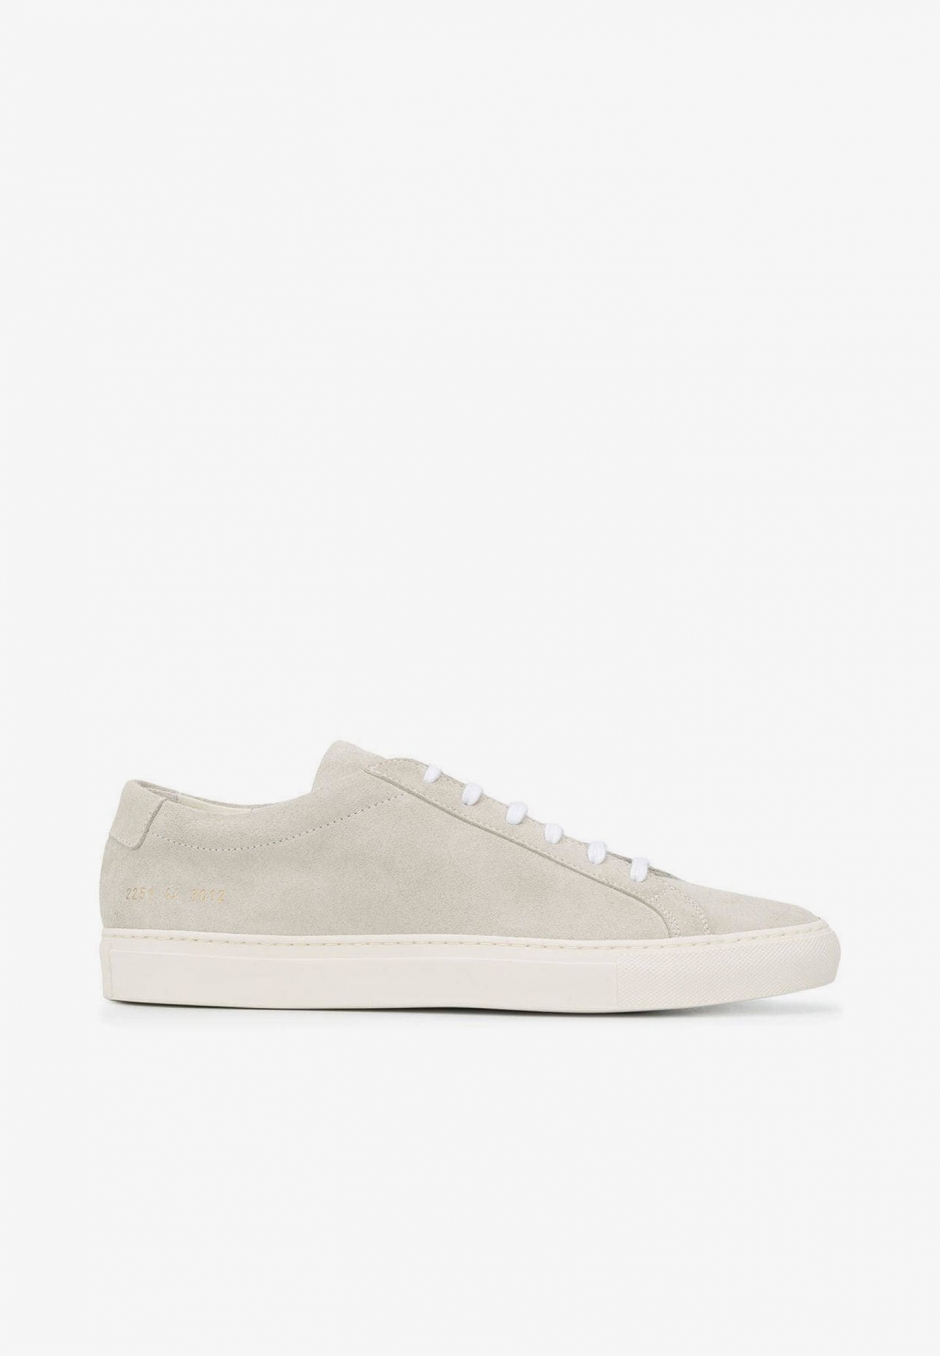 Common Projects Orginal Achilles Suede Off White